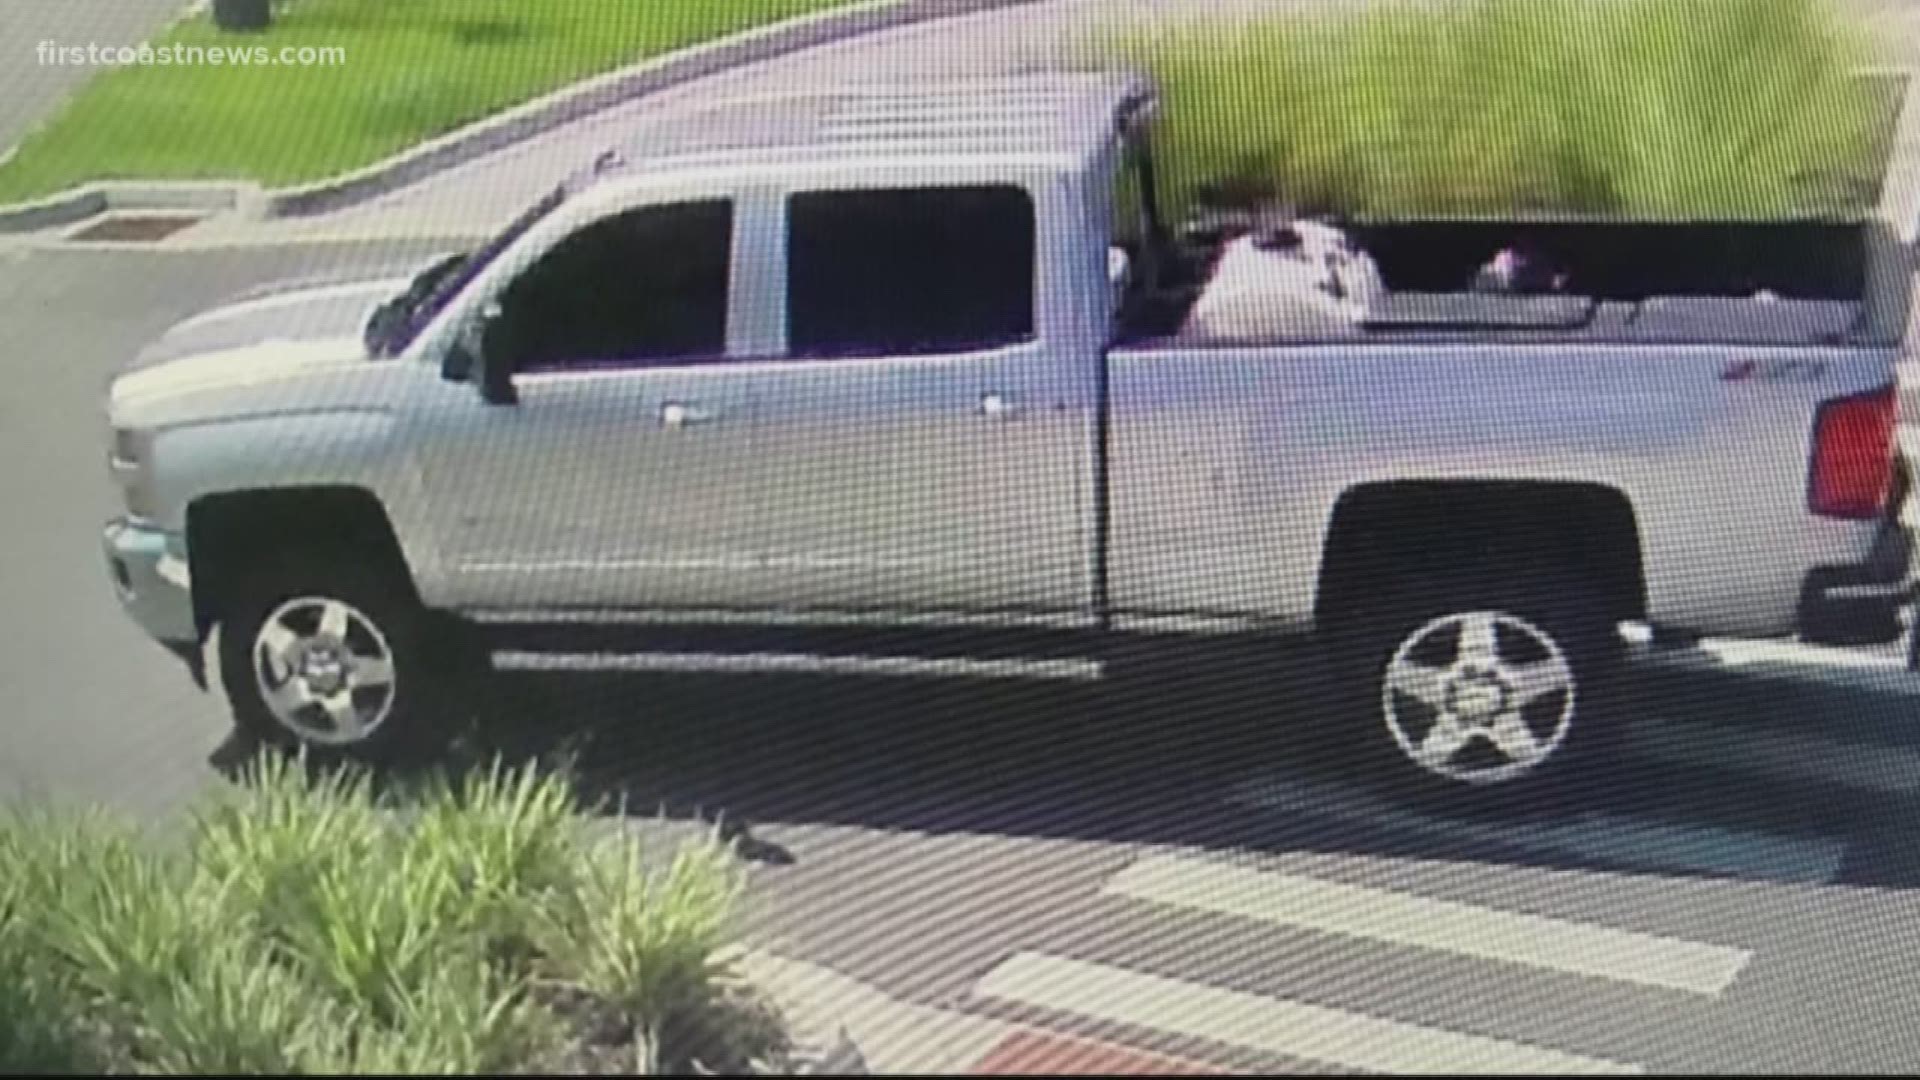 The St. Johns County Sheriff's Office is searching for a man who witnesses say took off in this truck after dragging a female with him.